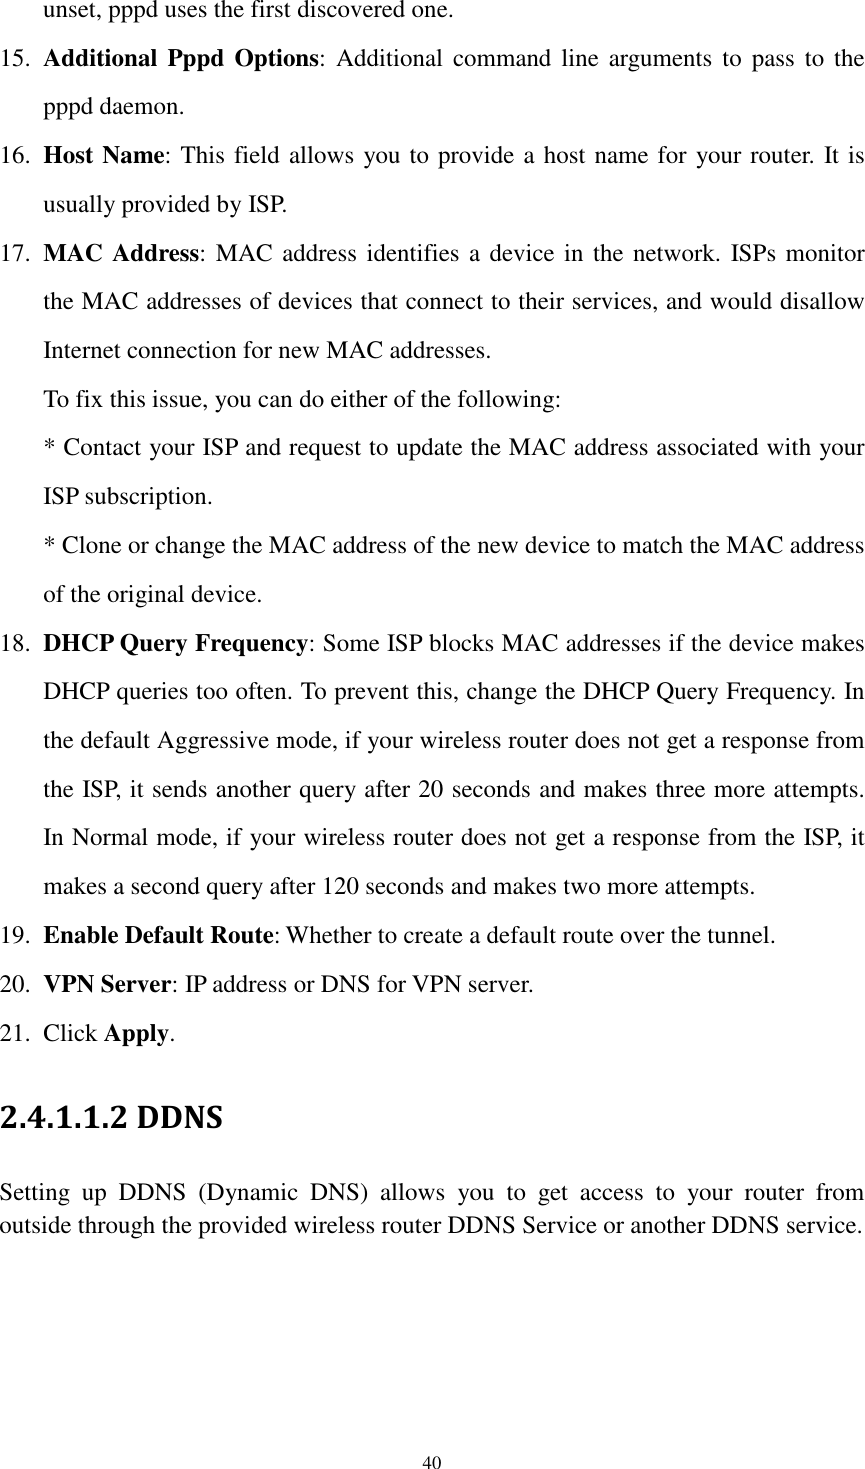  40 unset, pppd uses the first discovered one. 15. Additional  Pppd  Options:  Additional  command  line  arguments  to  pass  to  the pppd daemon. 16. Host Name: This field allows you to provide a host name for your router. It is usually provided by ISP. 17. MAC Address: MAC address identifies a device in the network. ISPs monitor the MAC addresses of devices that connect to their services, and would disallow Internet connection for new MAC addresses.   To fix this issue, you can do either of the following:   * Contact your ISP and request to update the MAC address associated with your ISP subscription.   * Clone or change the MAC address of the new device to match the MAC address of the original device. 18. DHCP Query Frequency: Some ISP blocks MAC addresses if the device makes DHCP queries too often. To prevent this, change the DHCP Query Frequency. In the default Aggressive mode, if your wireless router does not get a response from the ISP, it sends another query after 20 seconds and makes three more attempts. In Normal mode, if your wireless router does not get a response from the ISP, it makes a second query after 120 seconds and makes two more attempts. 19. Enable Default Route: Whether to create a default route over the tunnel. 20. VPN Server: IP address or DNS for VPN server. 21. Click Apply. 2.4.1.1.2 DDNS   Setting  up  DDNS  (Dynamic  DNS)  allows  you  to  get  access  to  your  router  from outside through the provided wireless router DDNS Service or another DDNS service.  